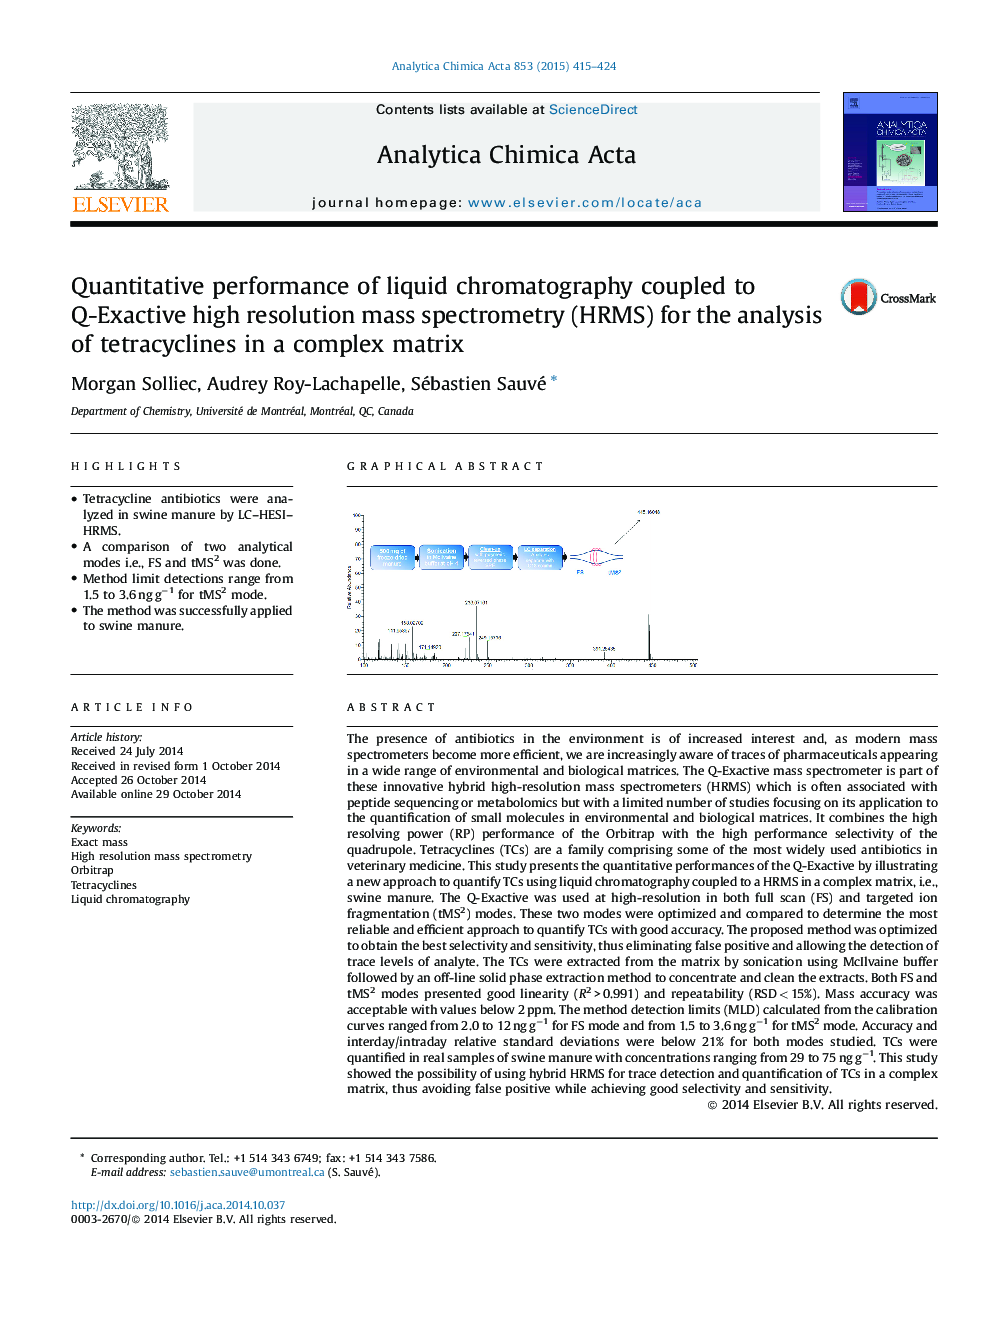 Quantitative performance of liquid chromatography coupled to Q-Exactive high resolution mass spectrometry (HRMS) for the analysis of tetracyclines in a complex matrix